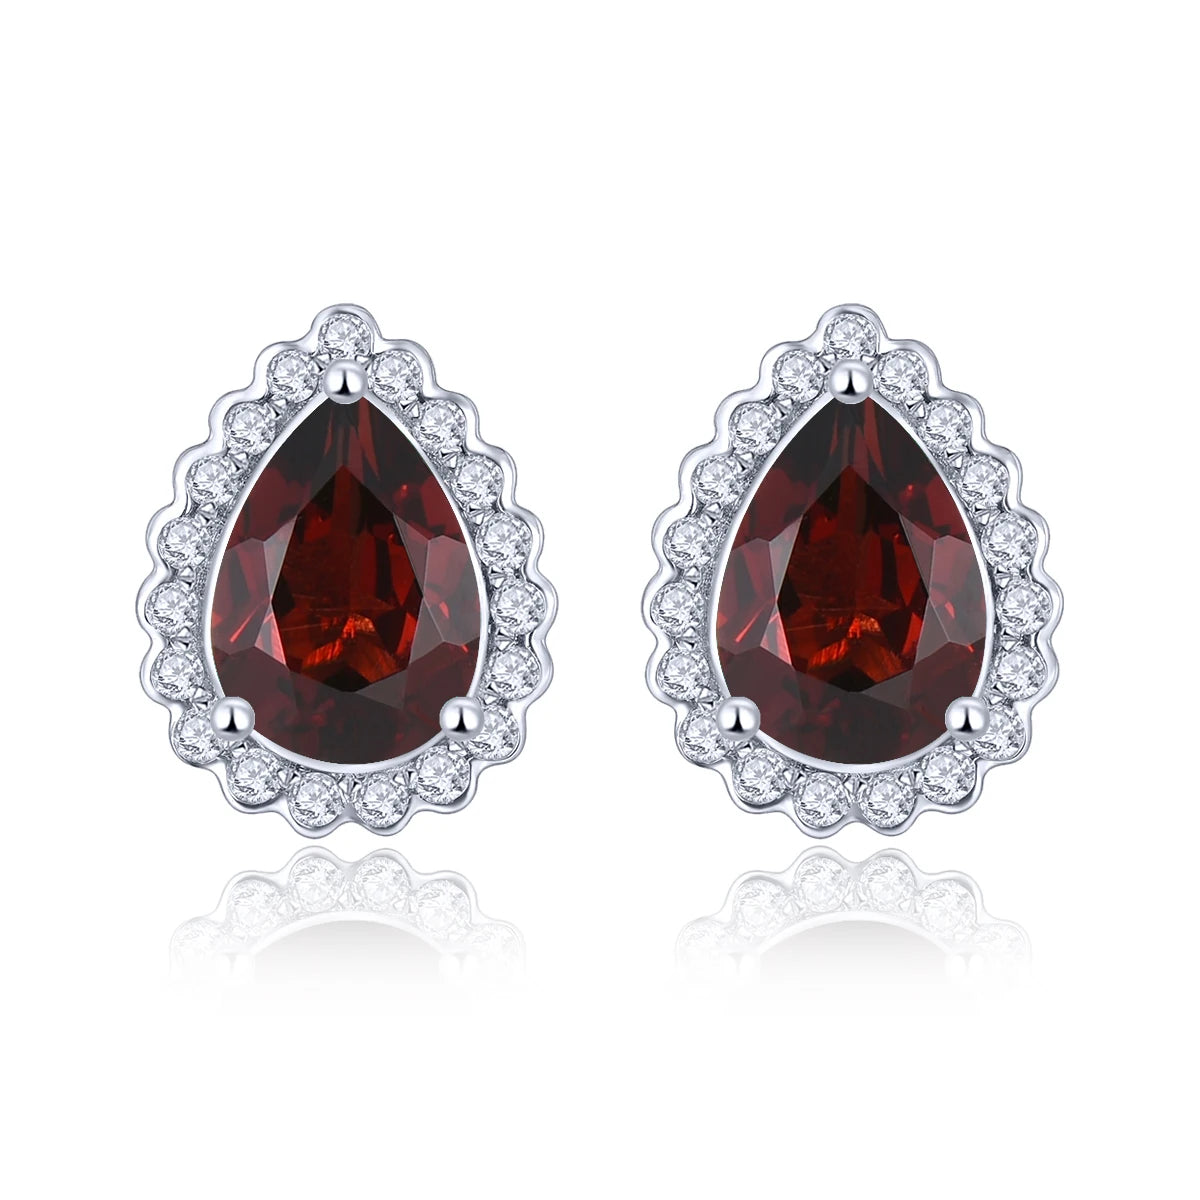 Natural Red Garnet Sterling Silver Stud Earring 1.8 Carats Genuine Gemstone Classic Romantic S925 Fine Jewelrys Women Gifts Natural Garnet